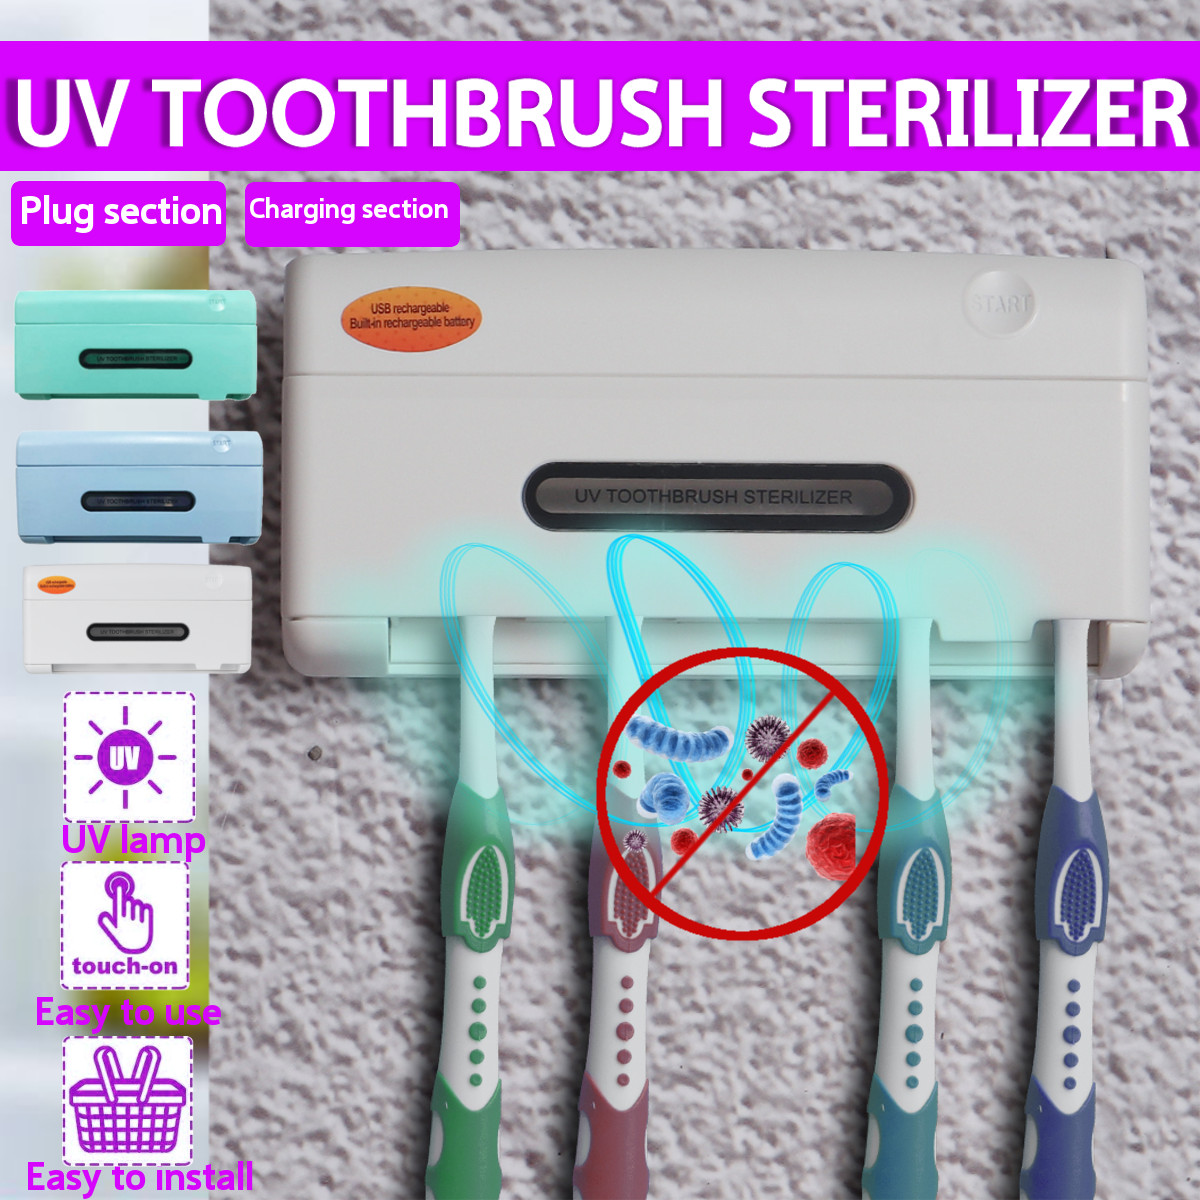 UV-Toothbrush-Disinfection-Holder-USB-Charging-Wall-Mounted-Automatic-Toothbrush-Sterilizer-Sanitize-1664883-1